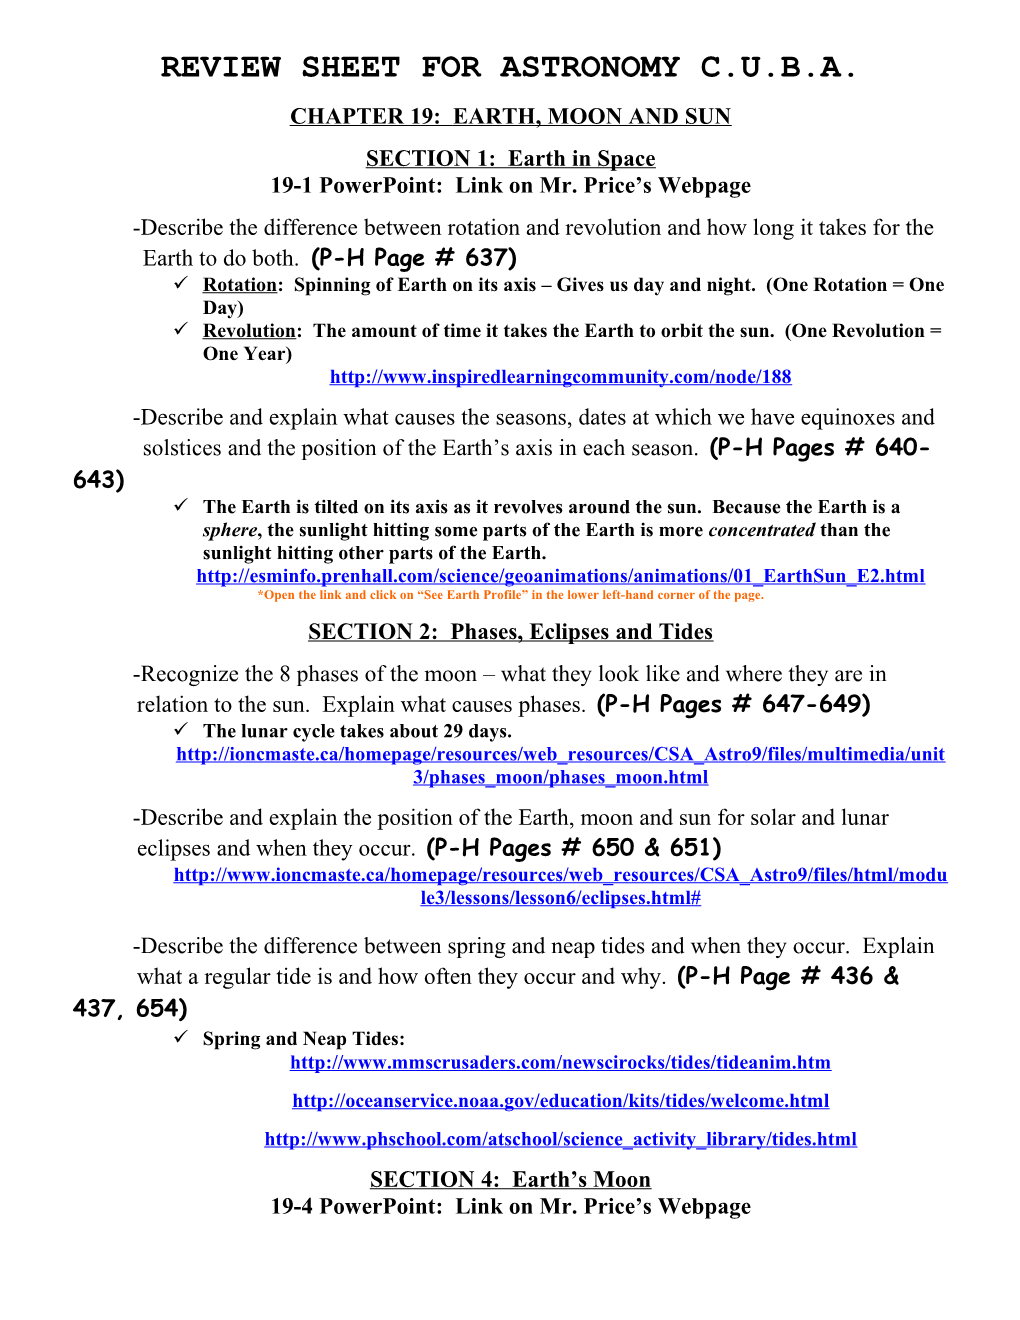 Review Sheet for Astronomy C